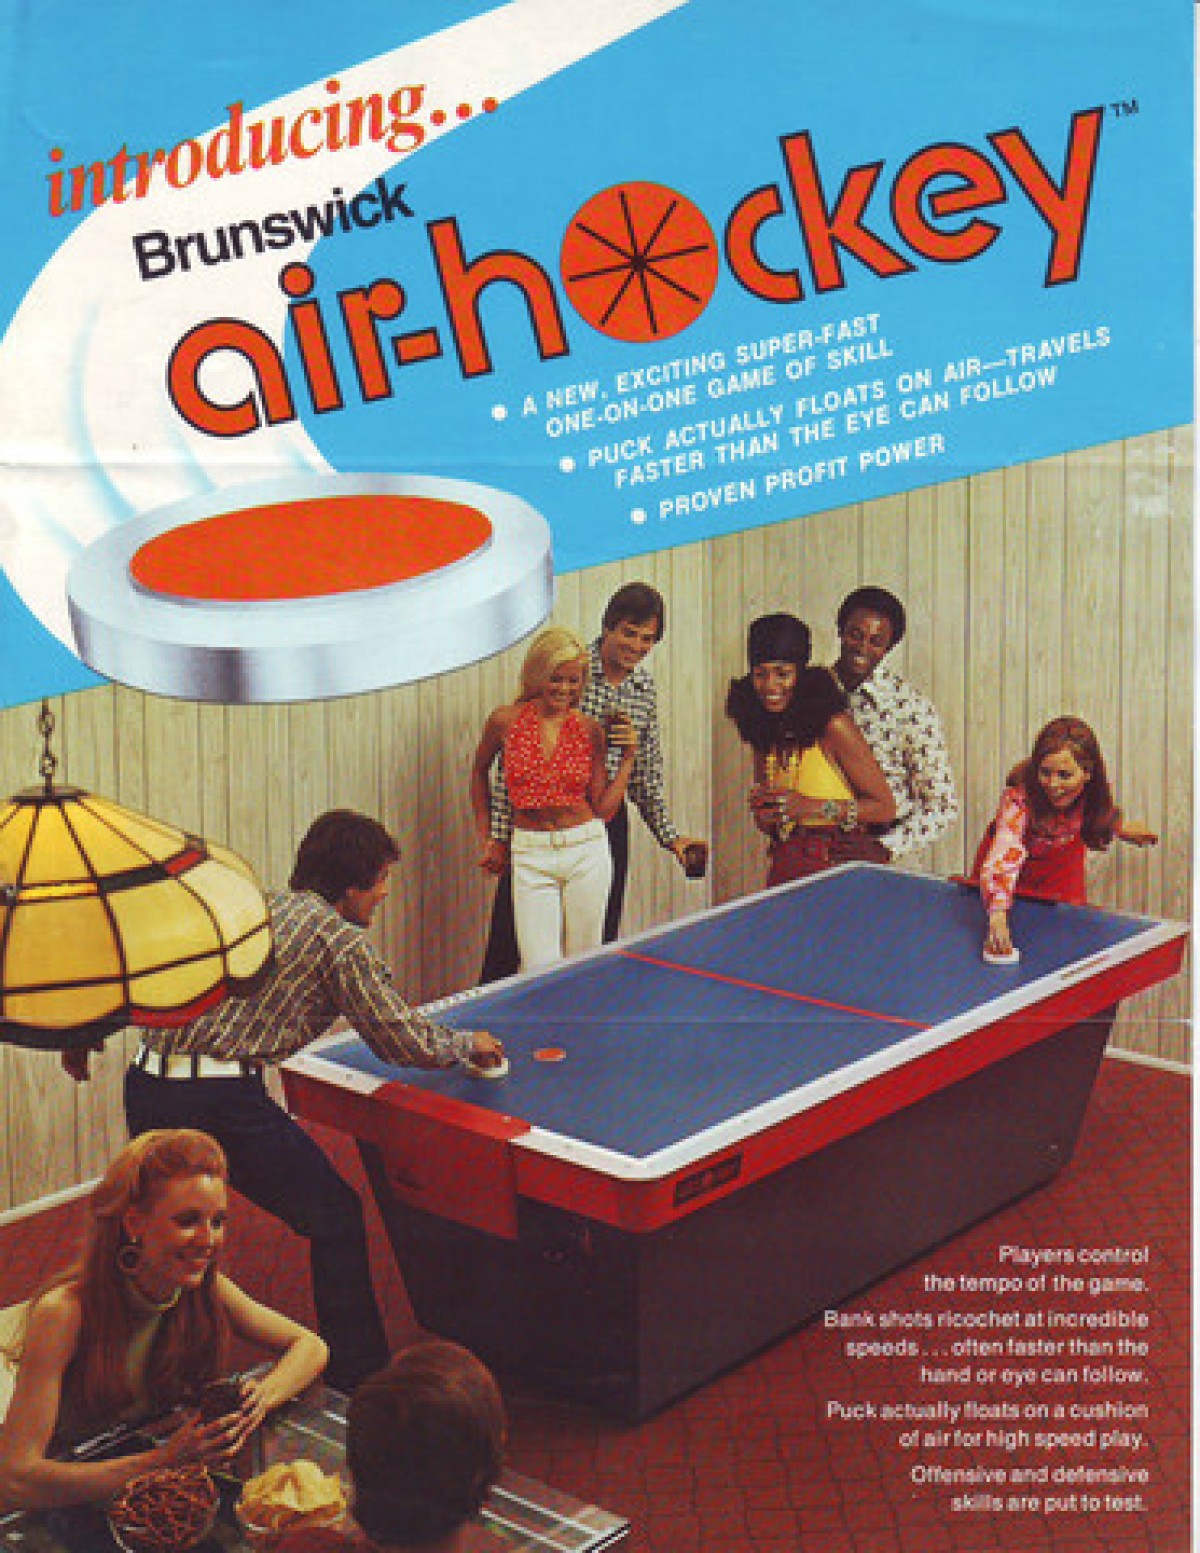 The Game of Air Hockey